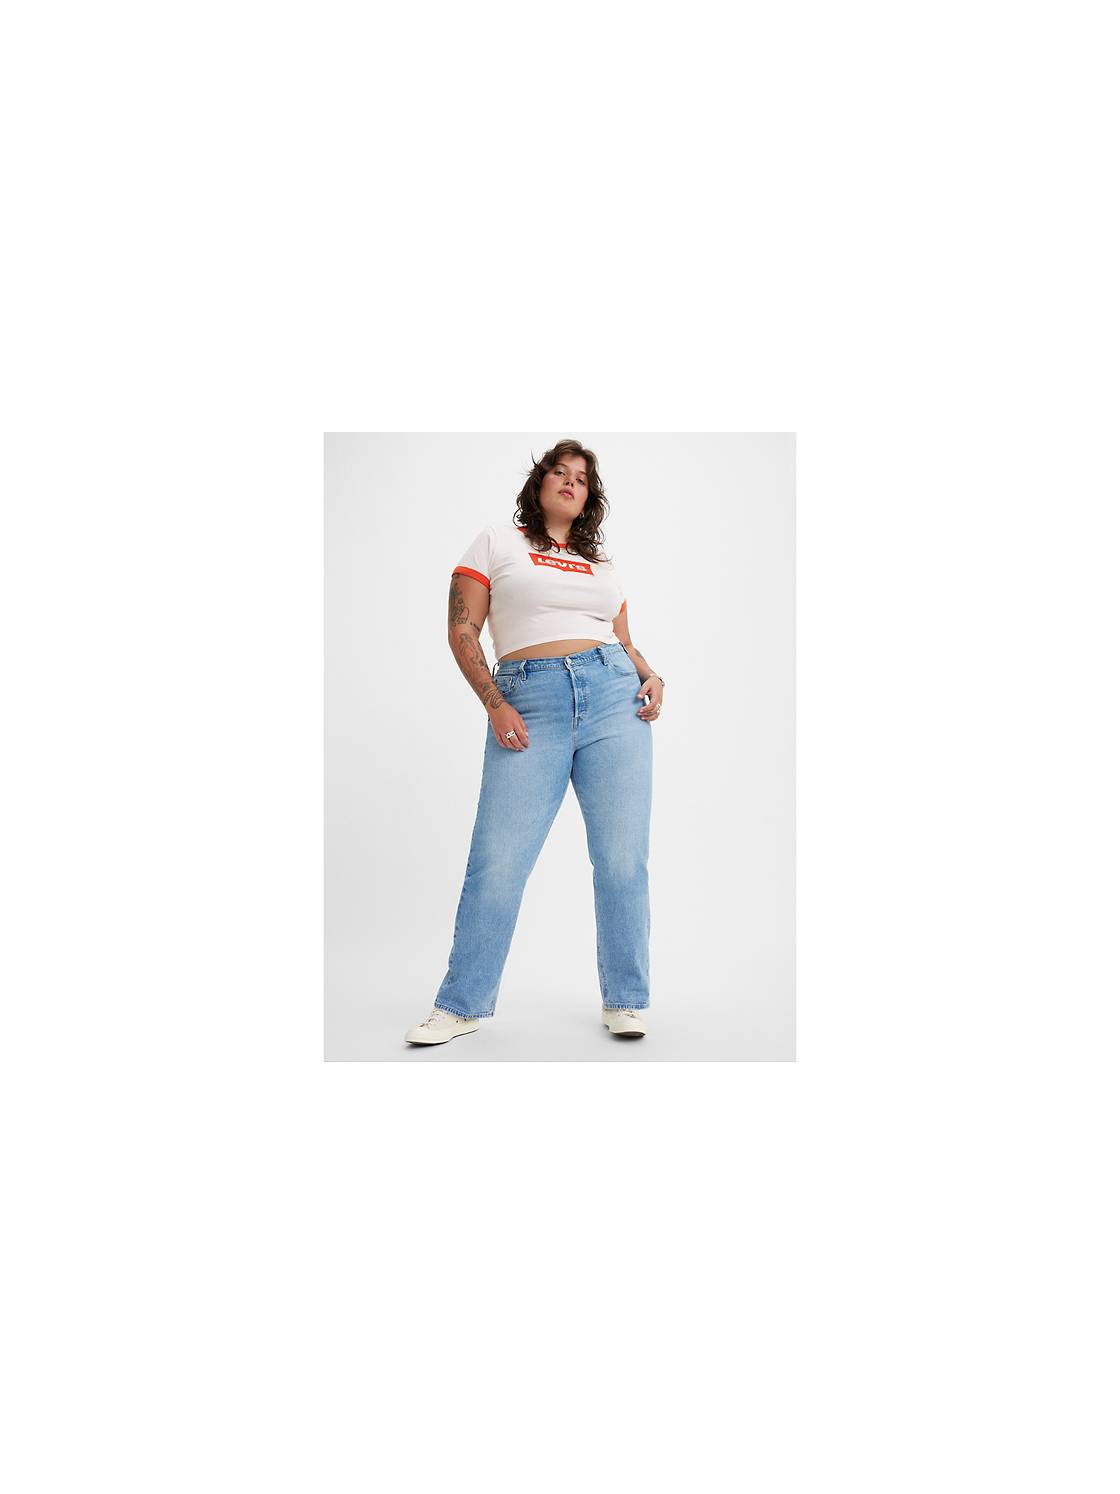 Levi's 501® Jeans for Women - The Original Button Fly